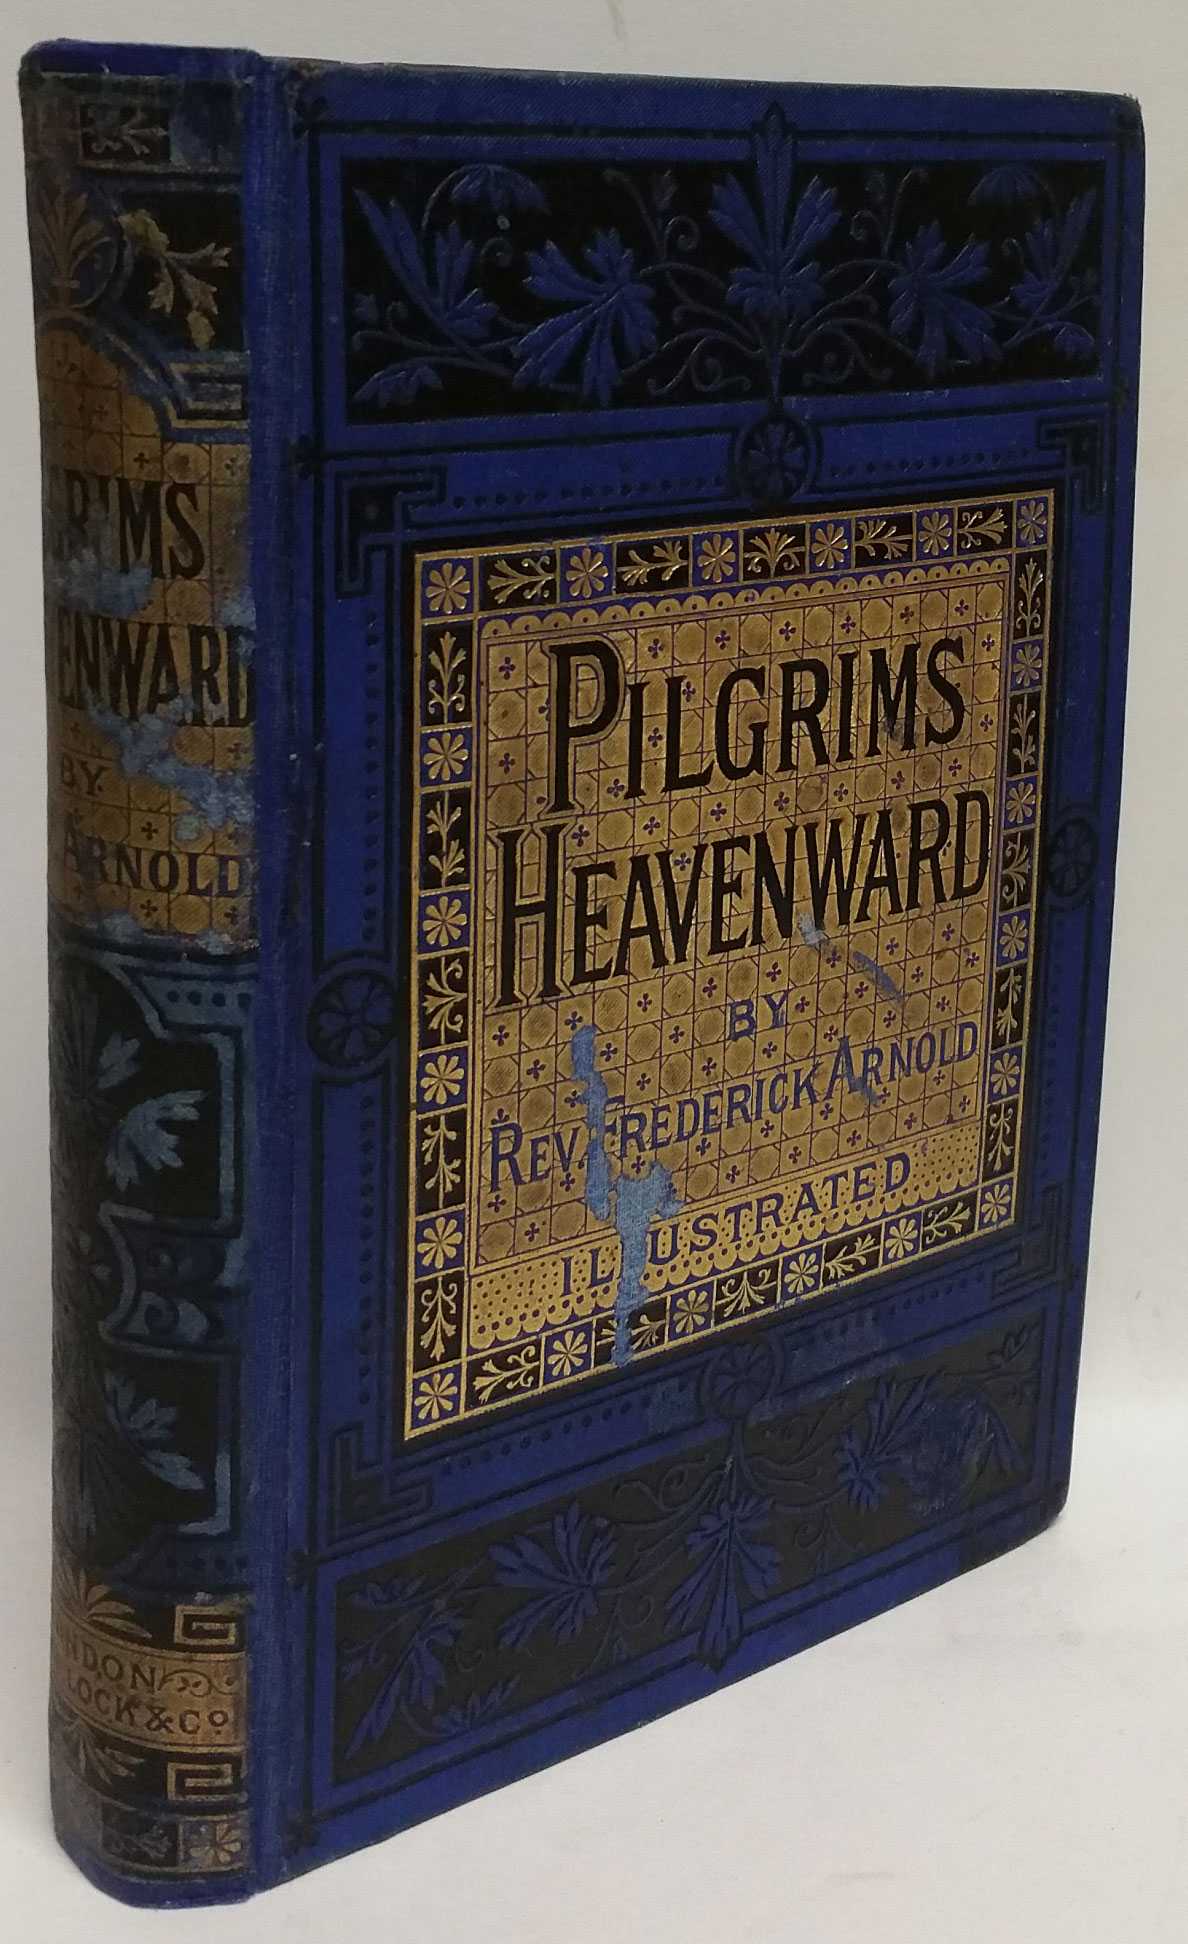 Frederick Arnold - Pilgrims Heavenward: Essays of Counsel and Encouragement for the Christian Life of the Present Day